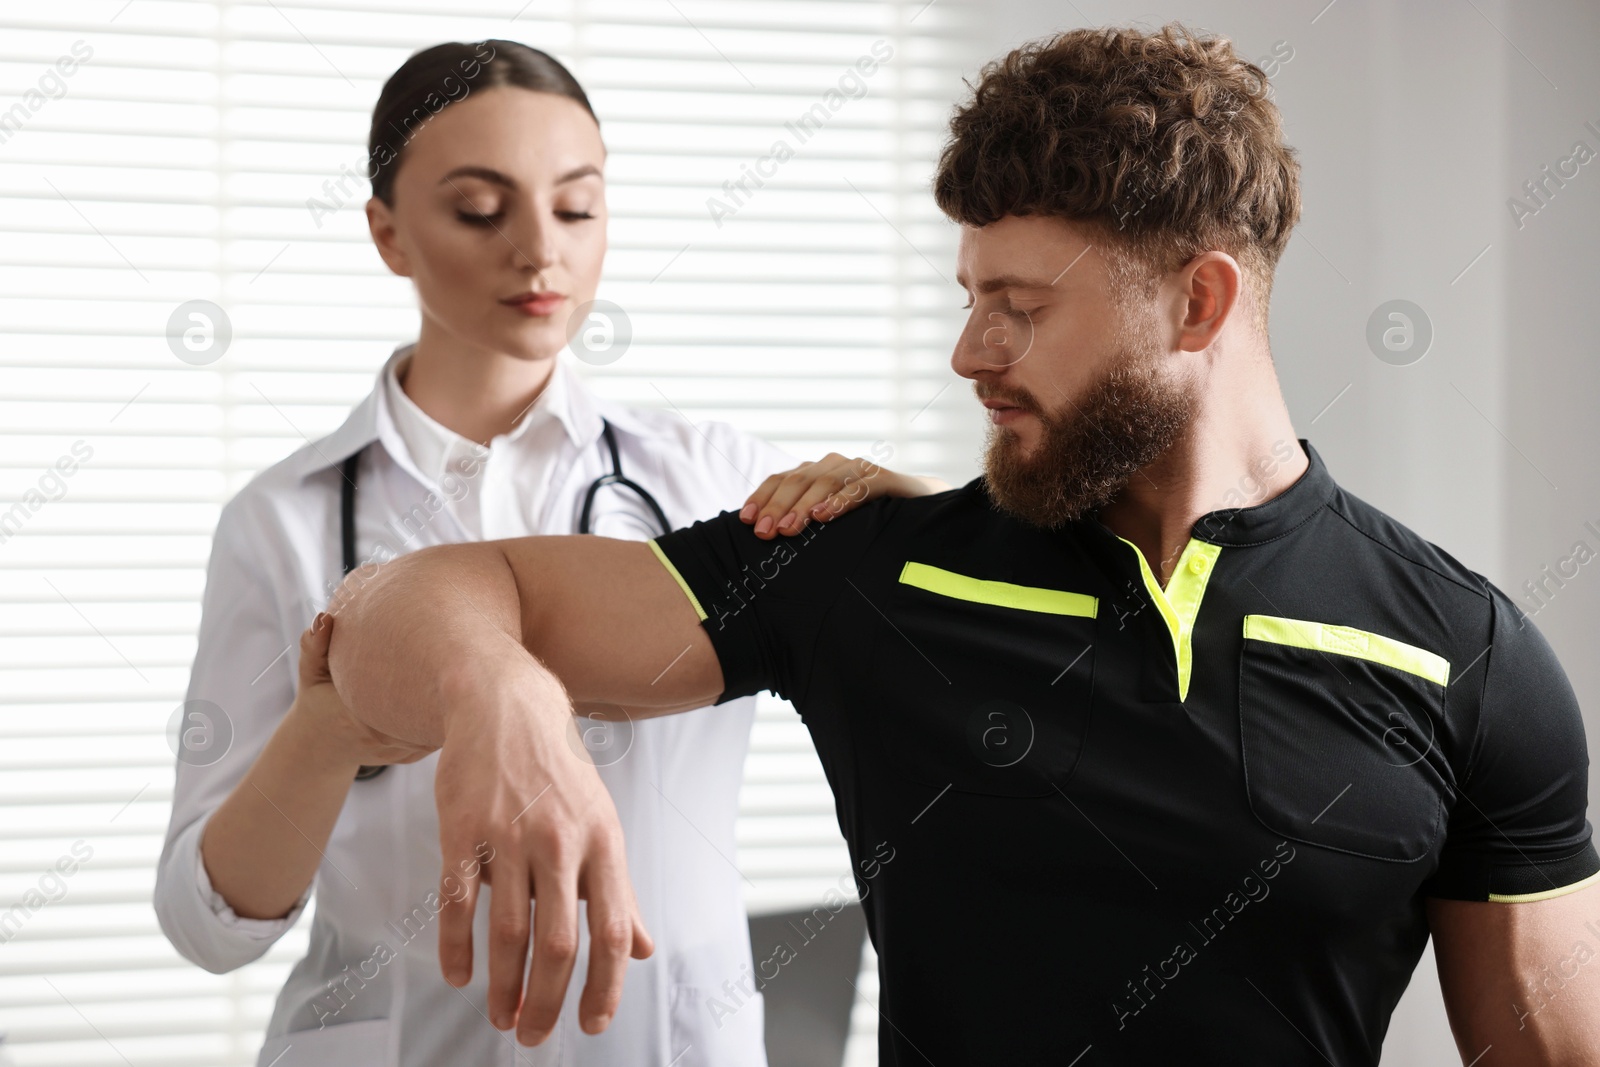 Photo of Sports injury. Doctor examining patient's shoulder in hospital